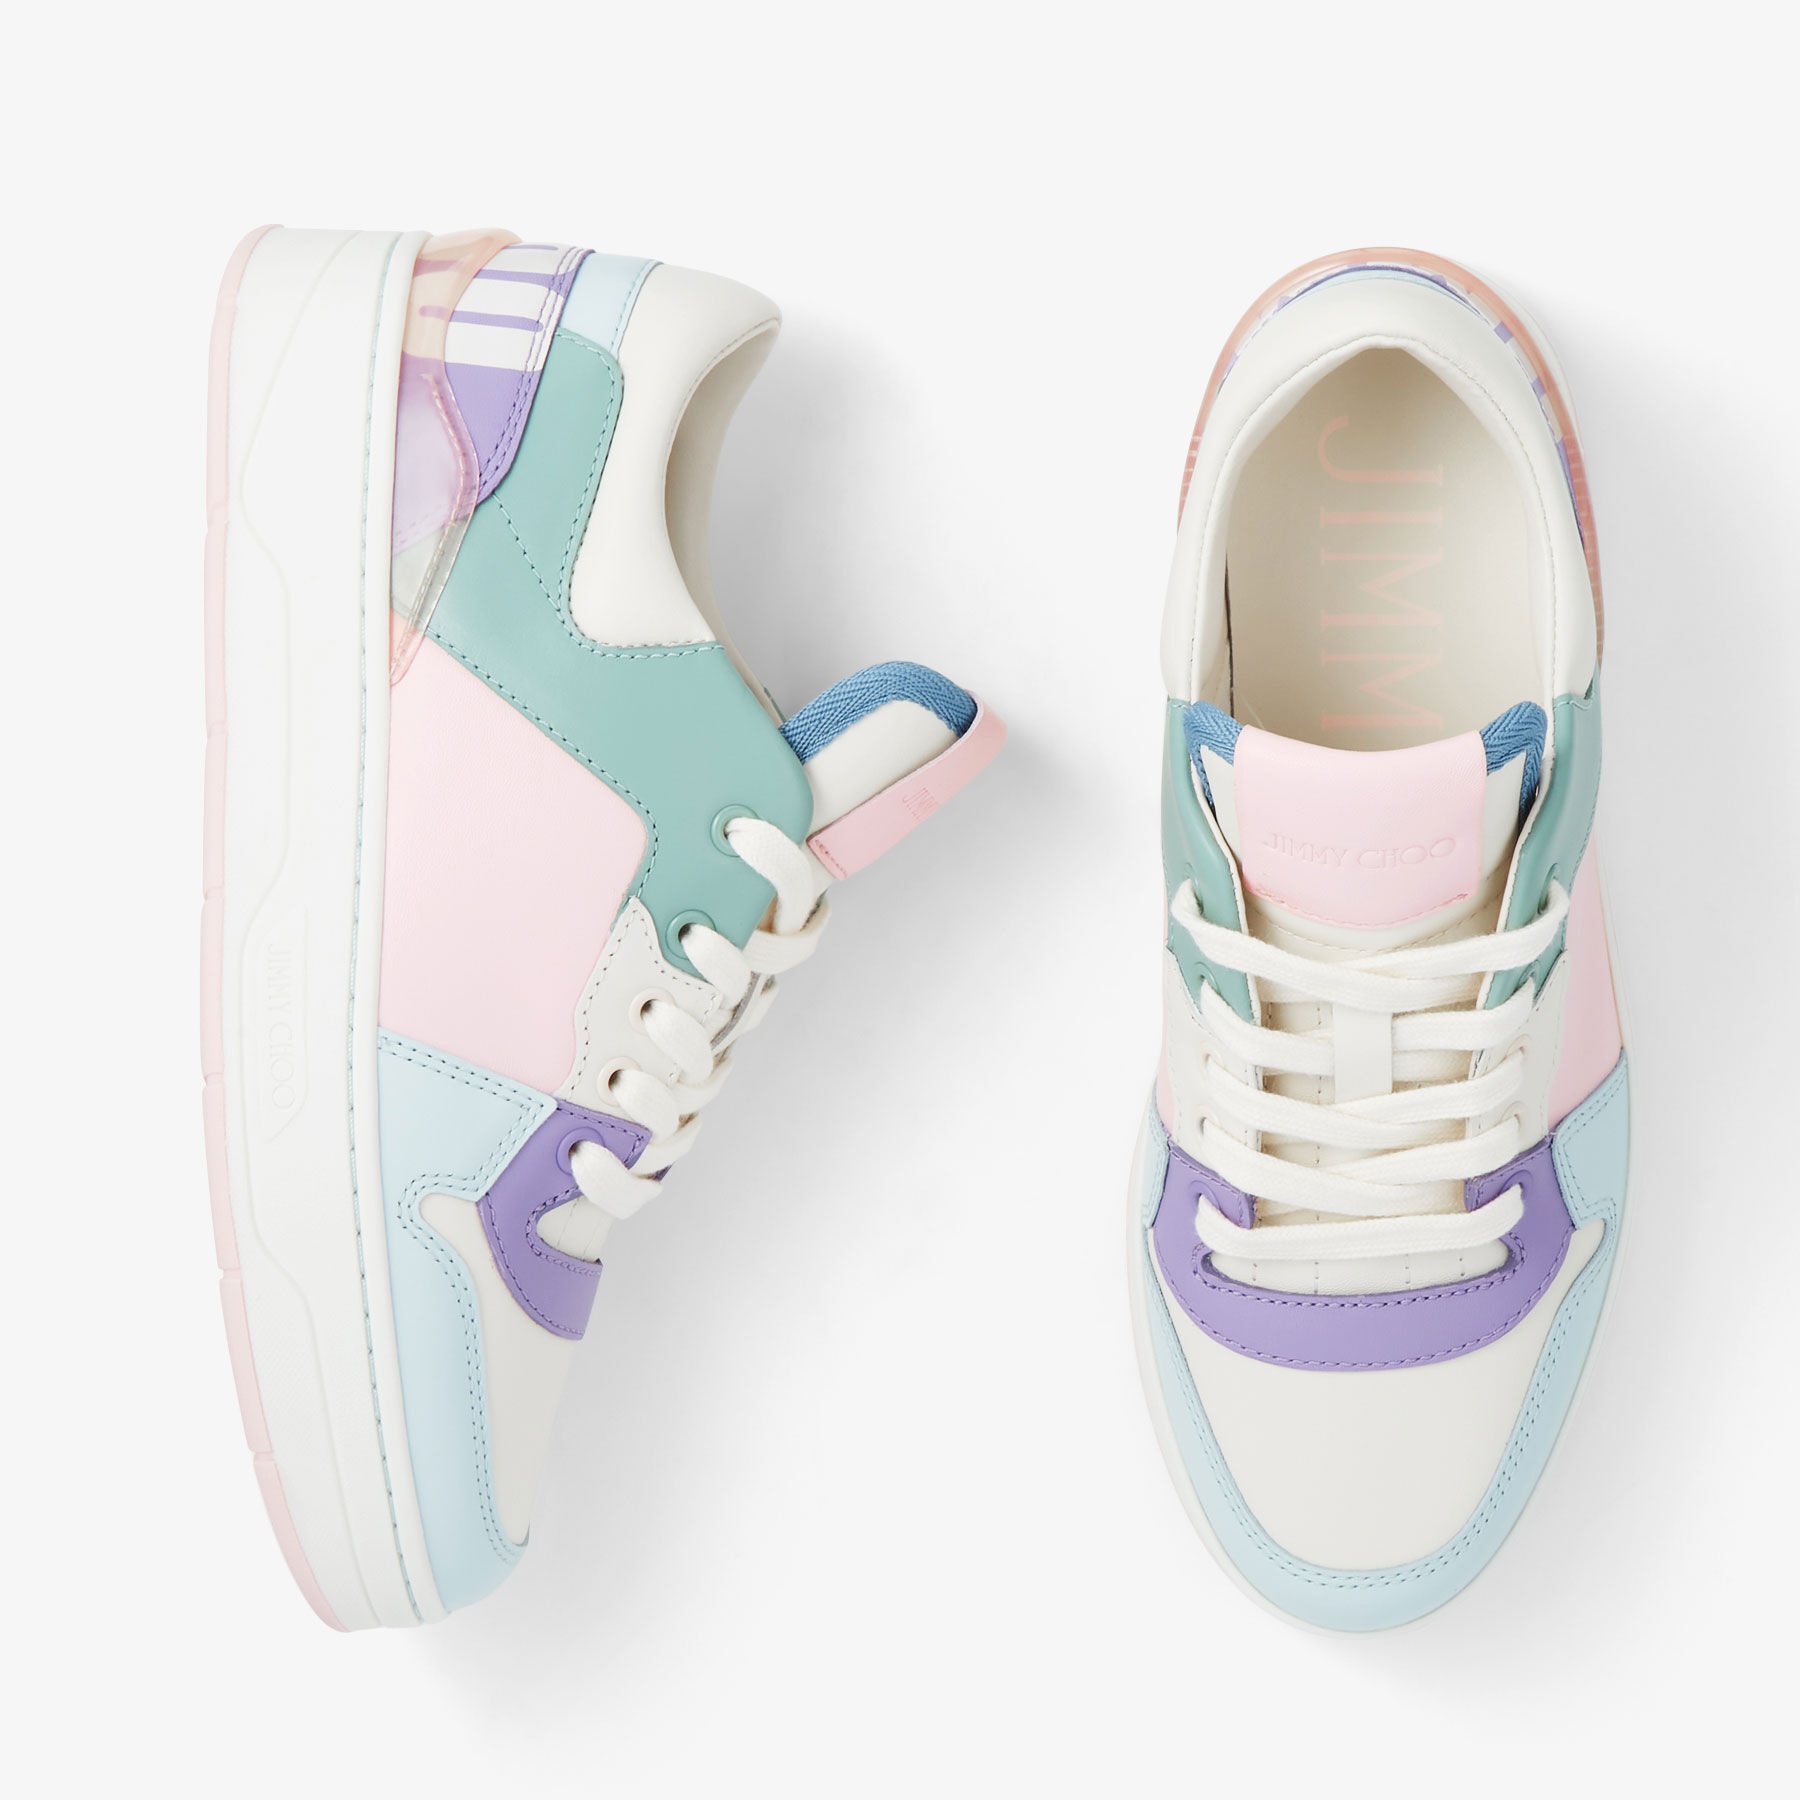 Florent/F
Powder Pink and Pastel Mix Leather Trainers - 4